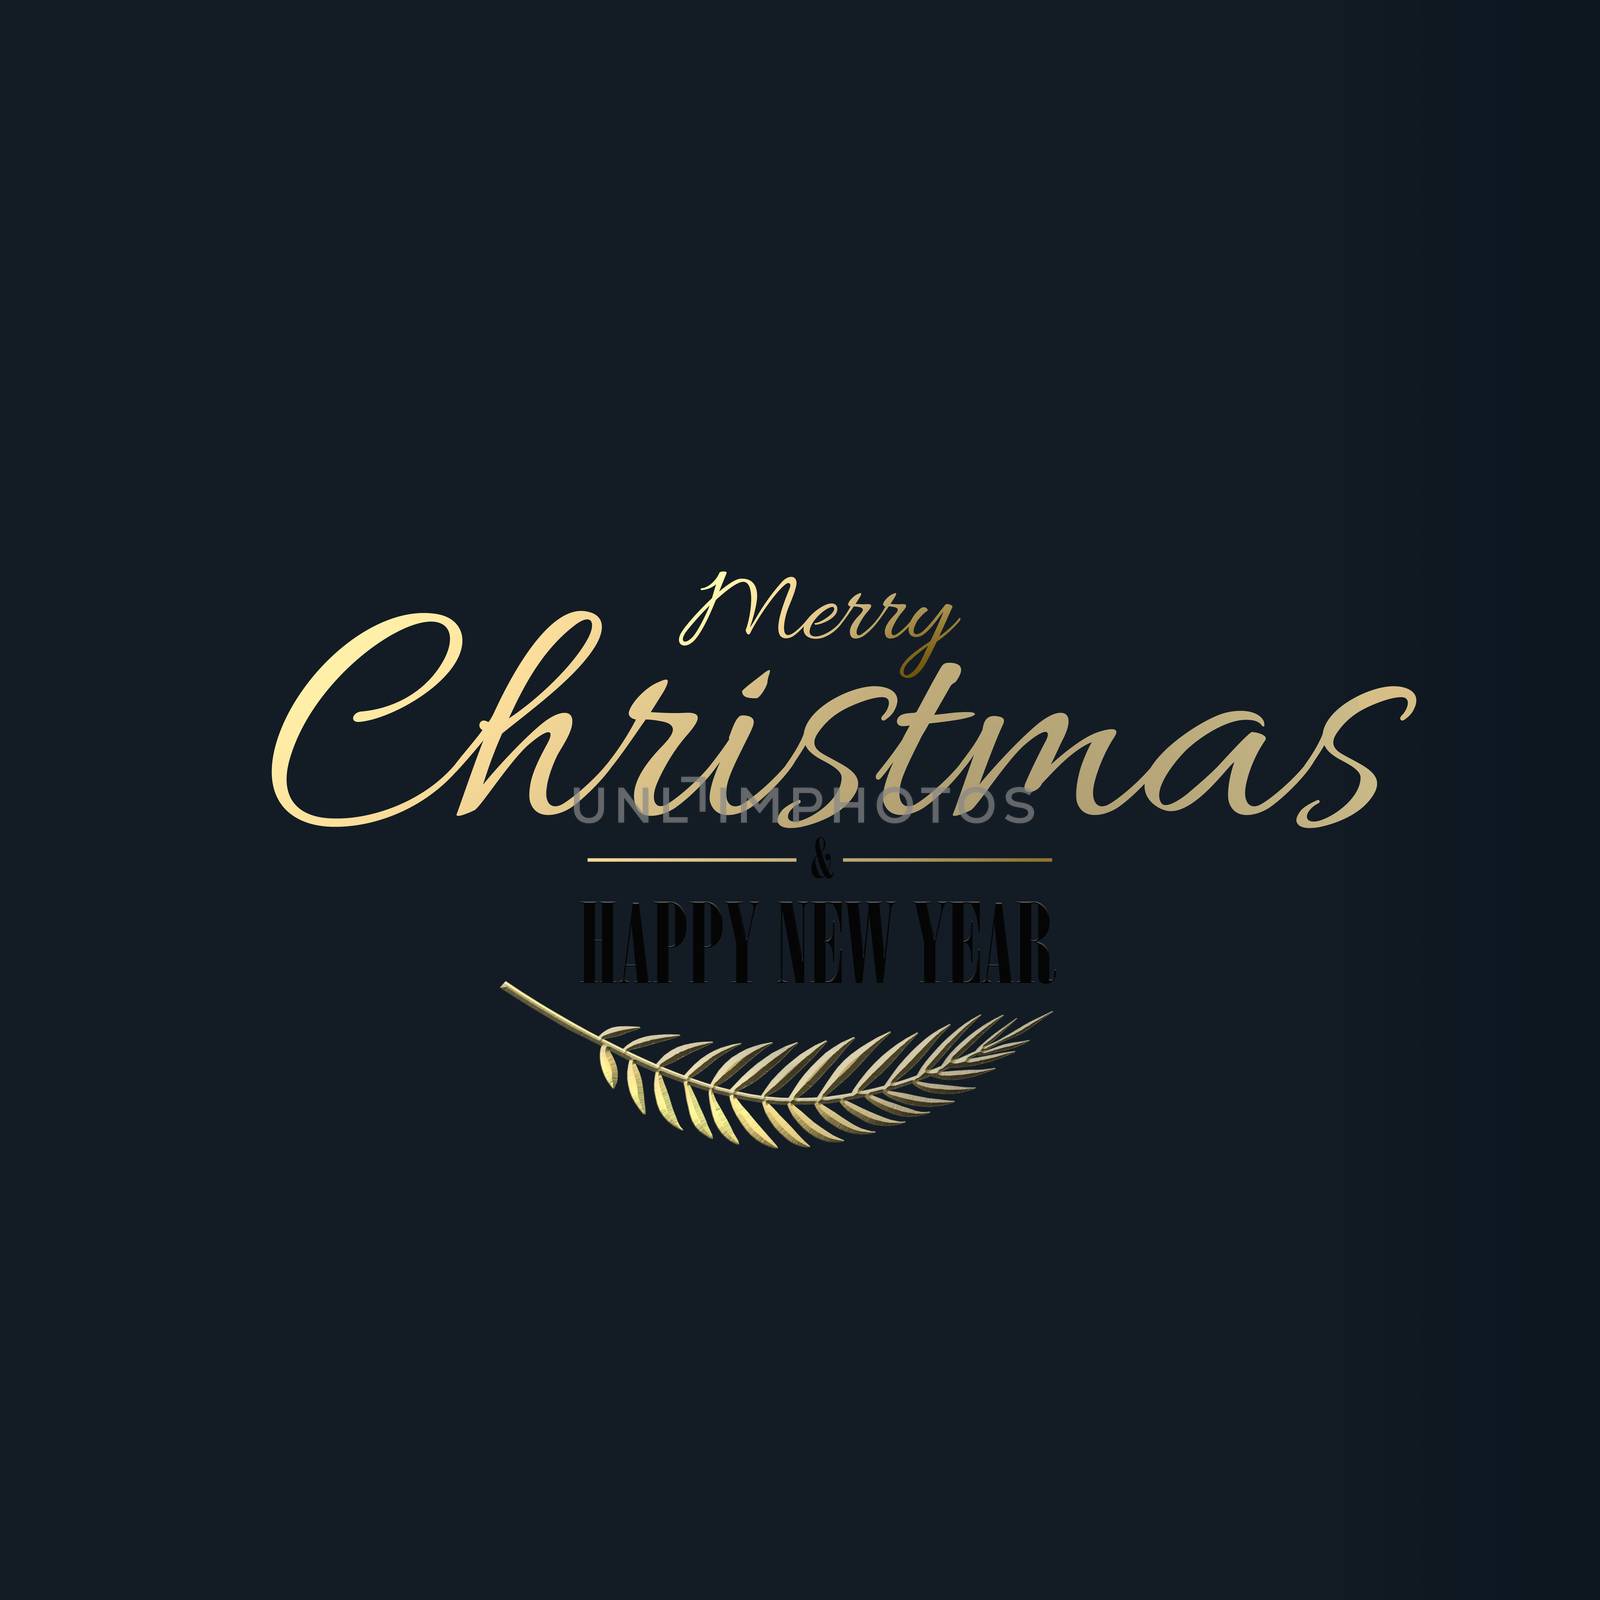 Stylish luxury minimalist Christmas design in gold and black. Golden text Merry Christmas Happy New Year on blue black background, Trendy elegant invitation Xmas card in 3D illustration